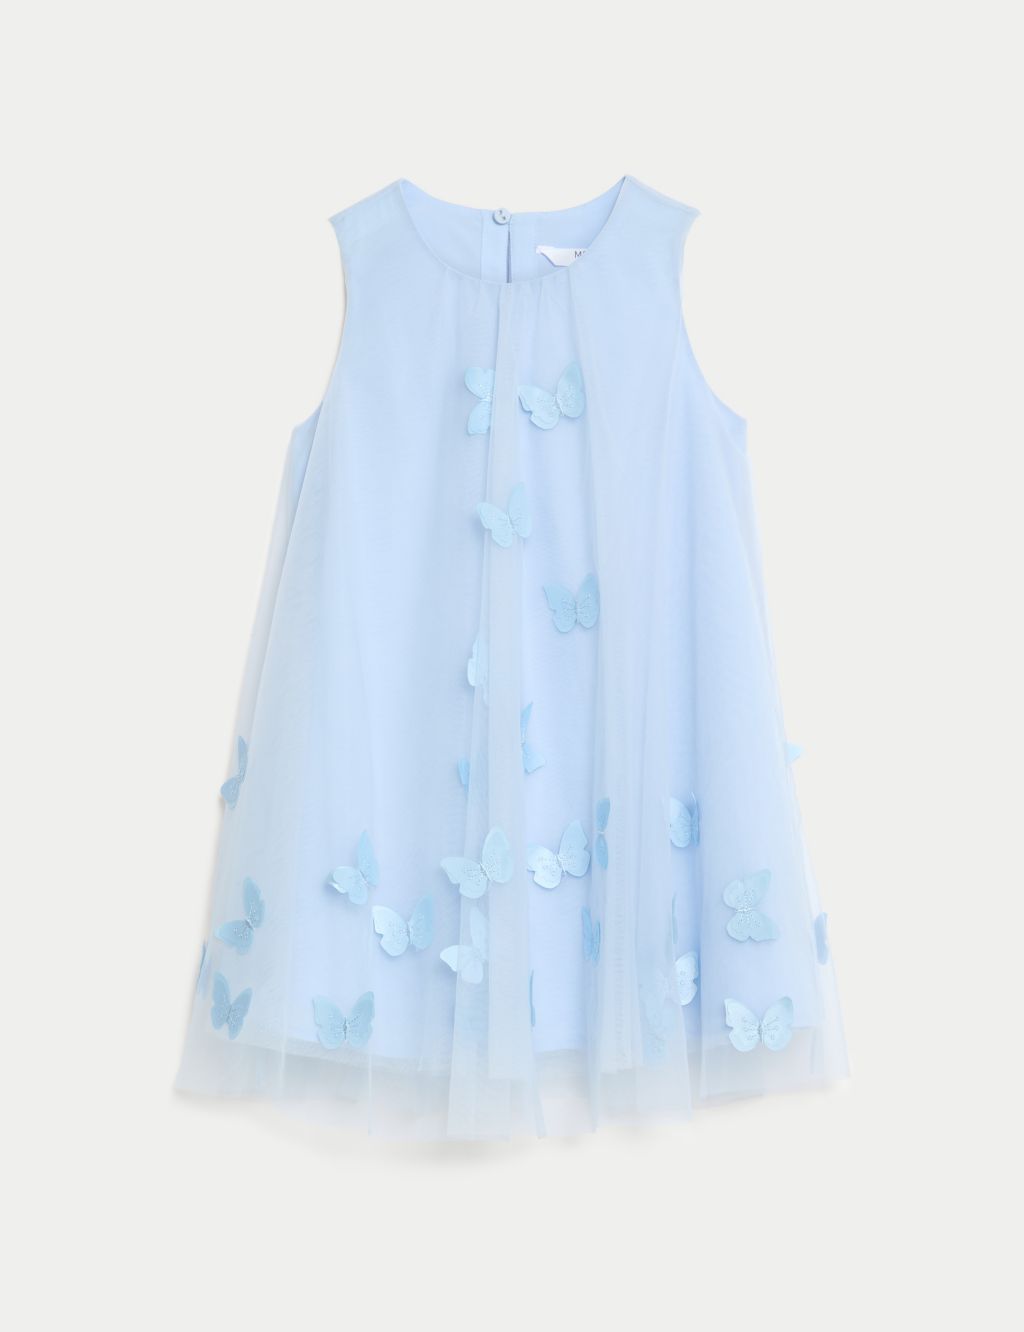 Butterfly Applique Dress (2-7 Years) image 2